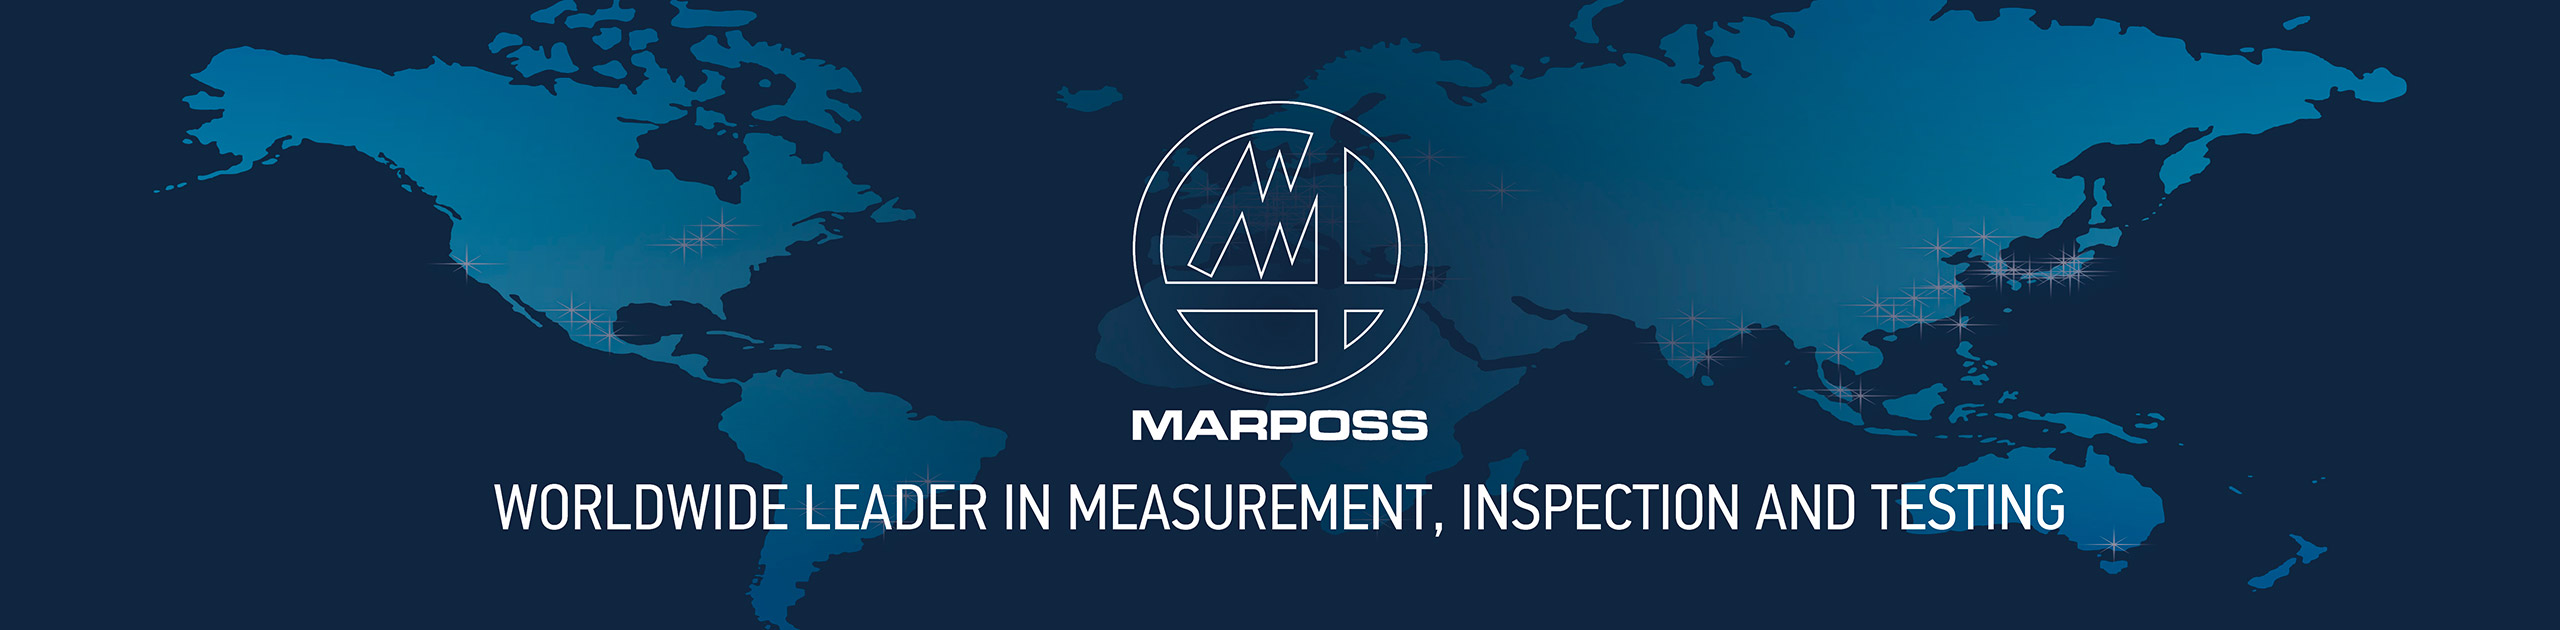 Marposs Worldwide leader in measurement, inspection and testing